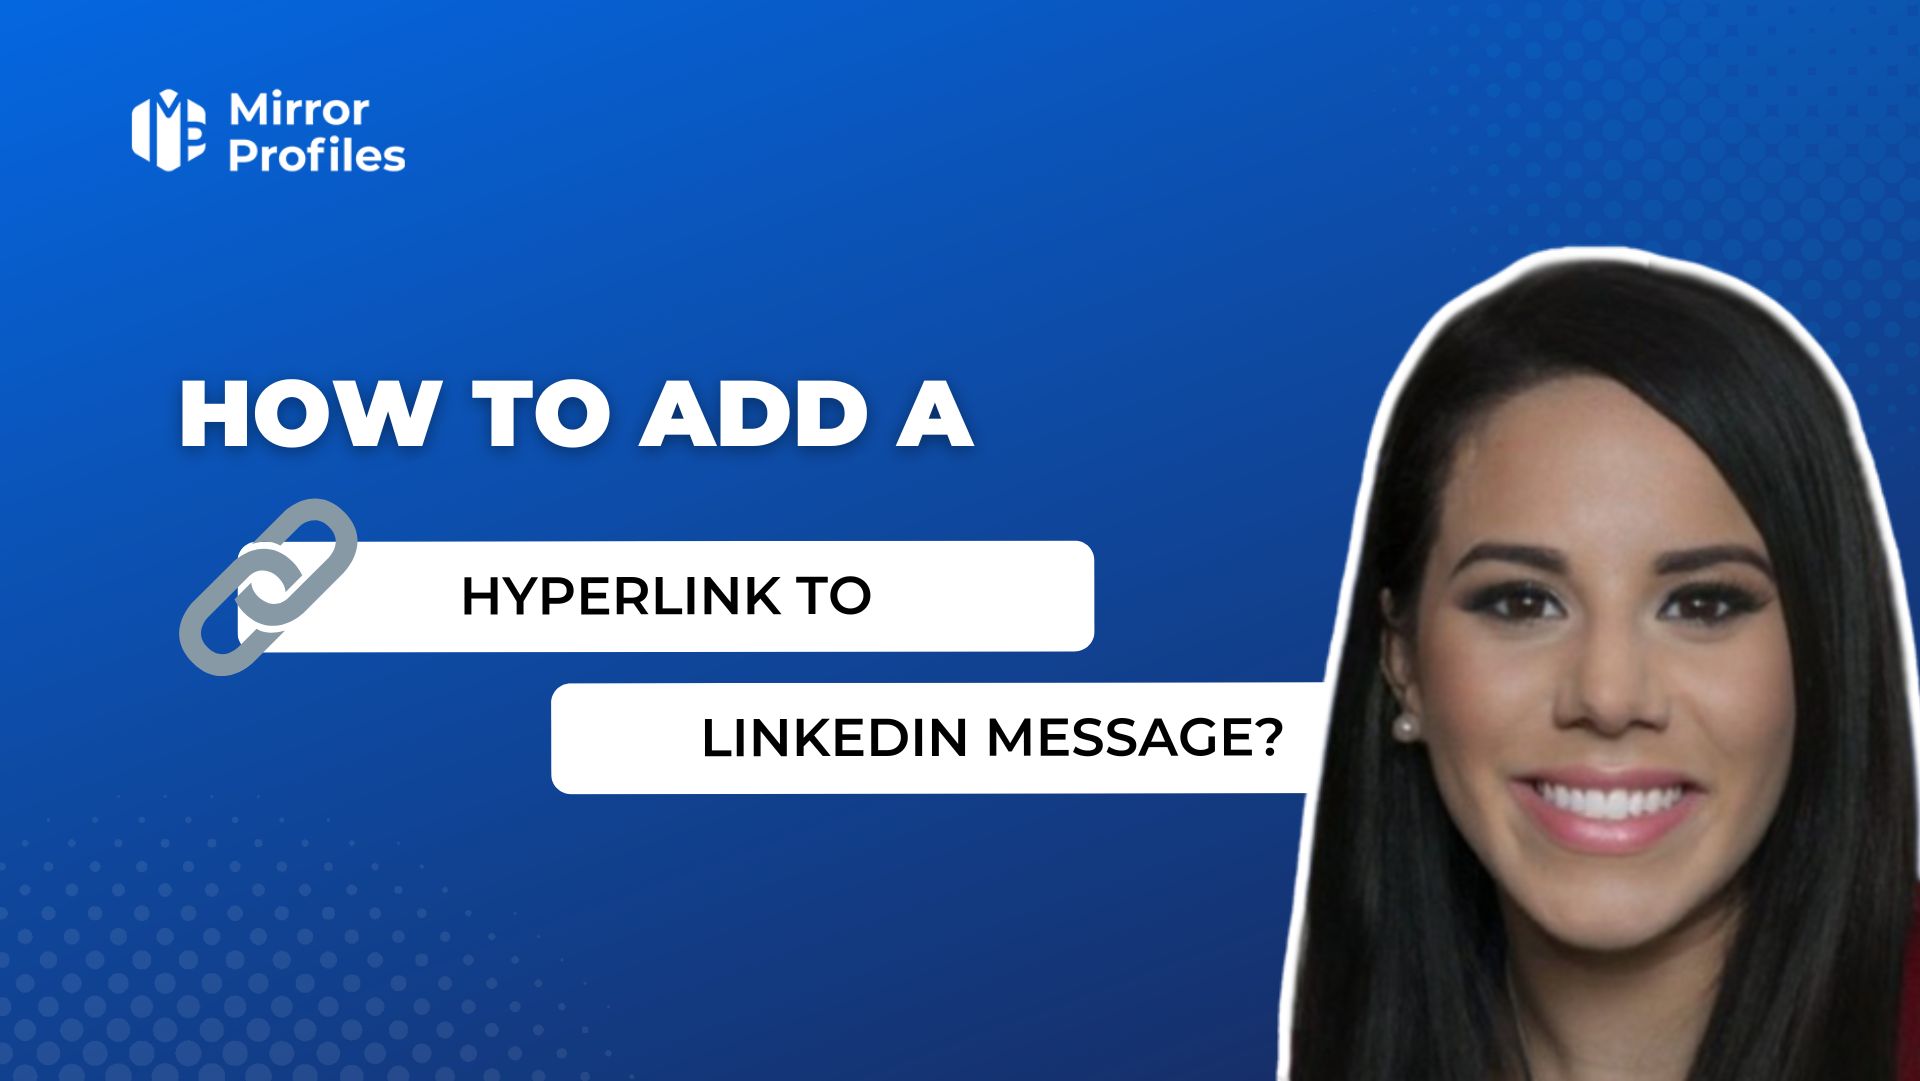 Woman presenting a linkedin message tutorial on adding a hyperlink.